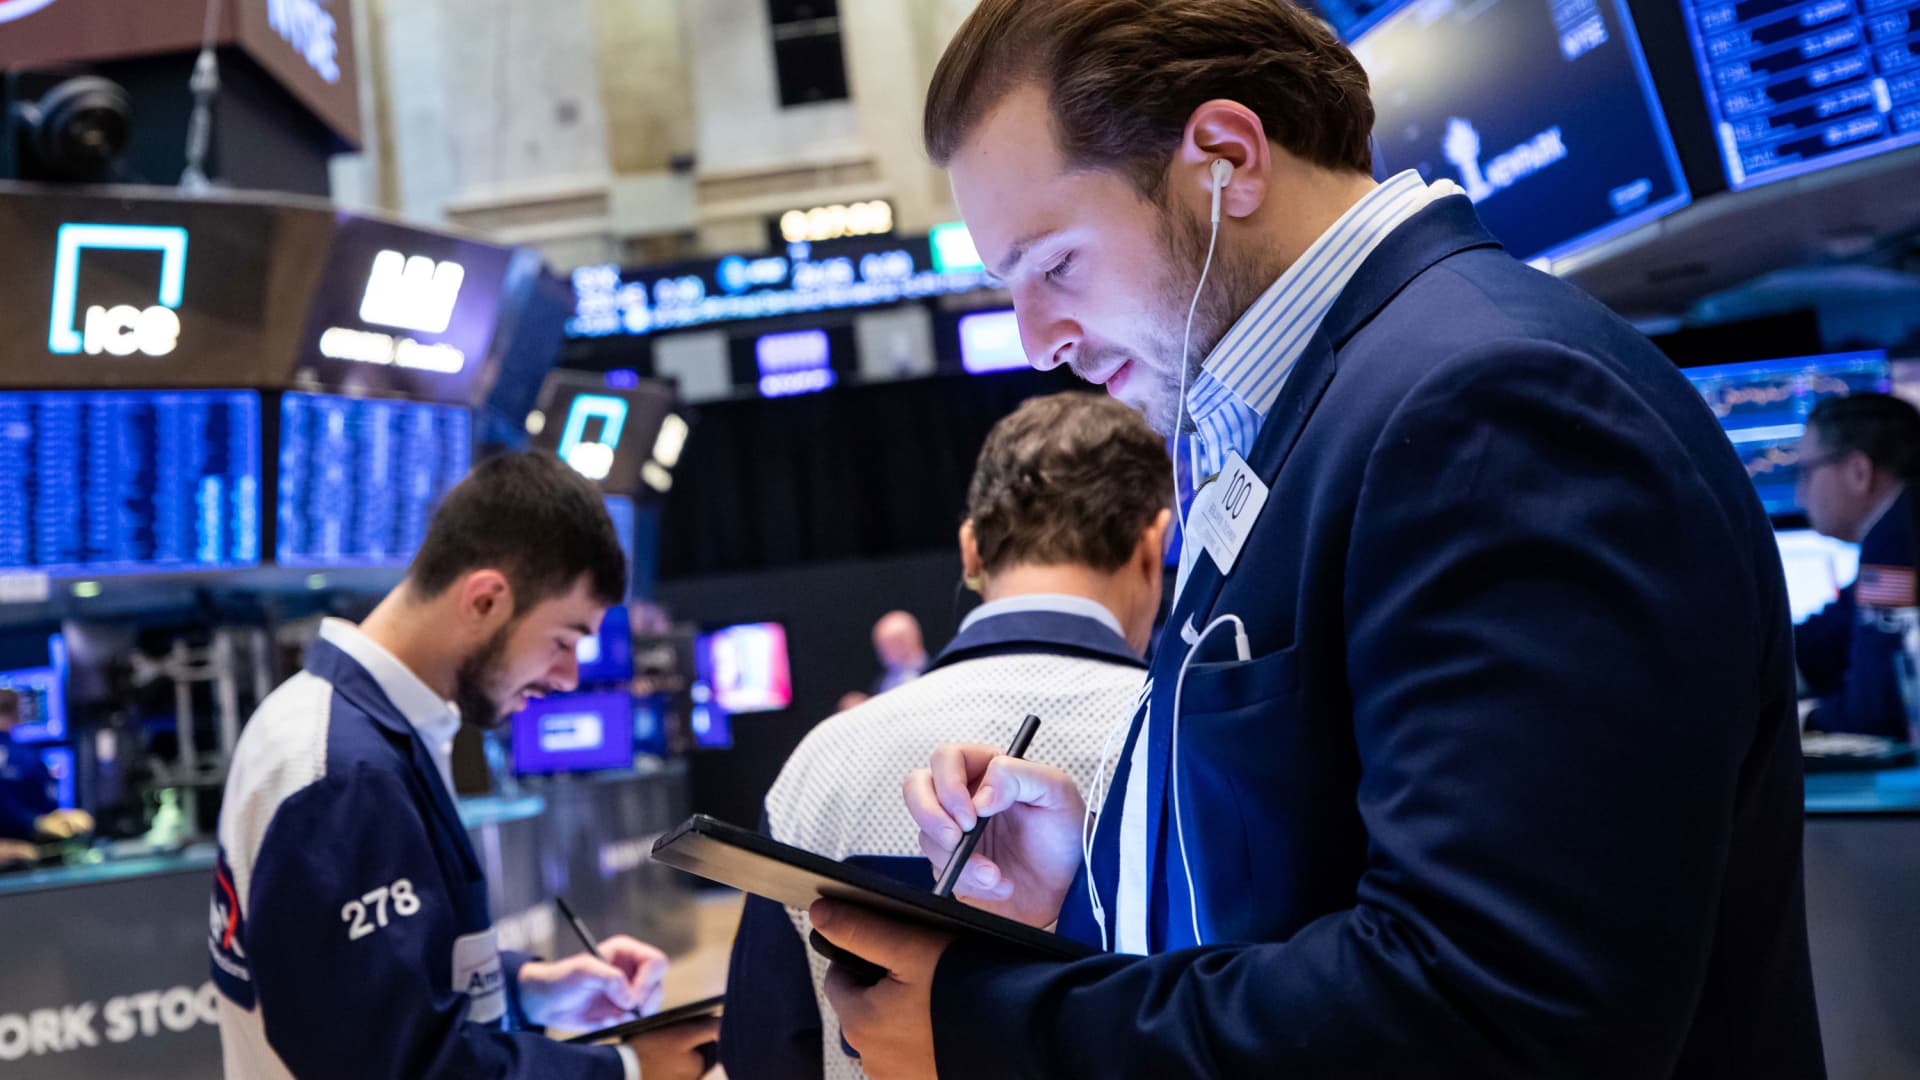 Traders on the floor of the NYSE, Feb. 15, 2022.